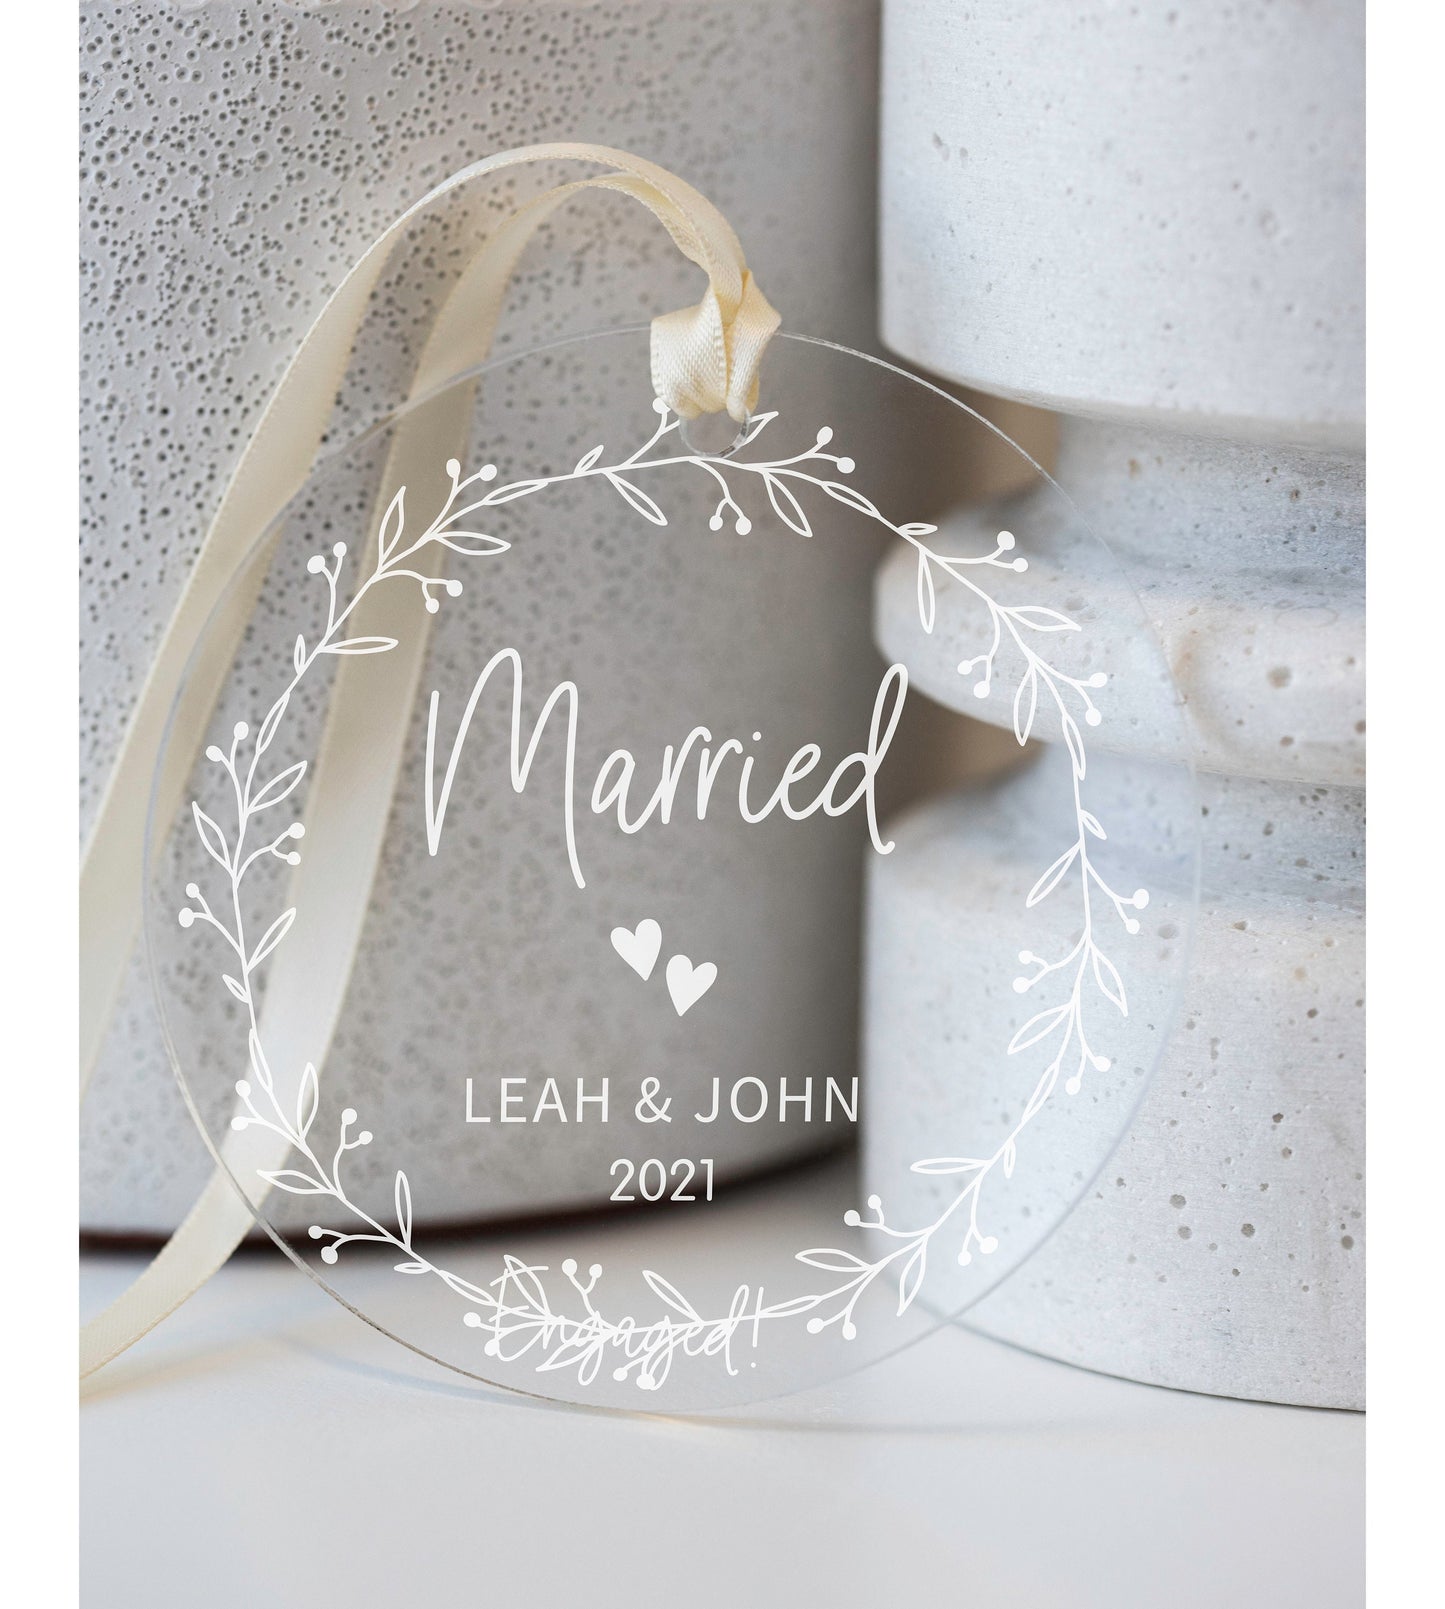 Personalized Married Ornament - Clear Acrylic - Mr & Mrs - Our First Christmas - Gift for the Couple - Wedding Gift - AO11